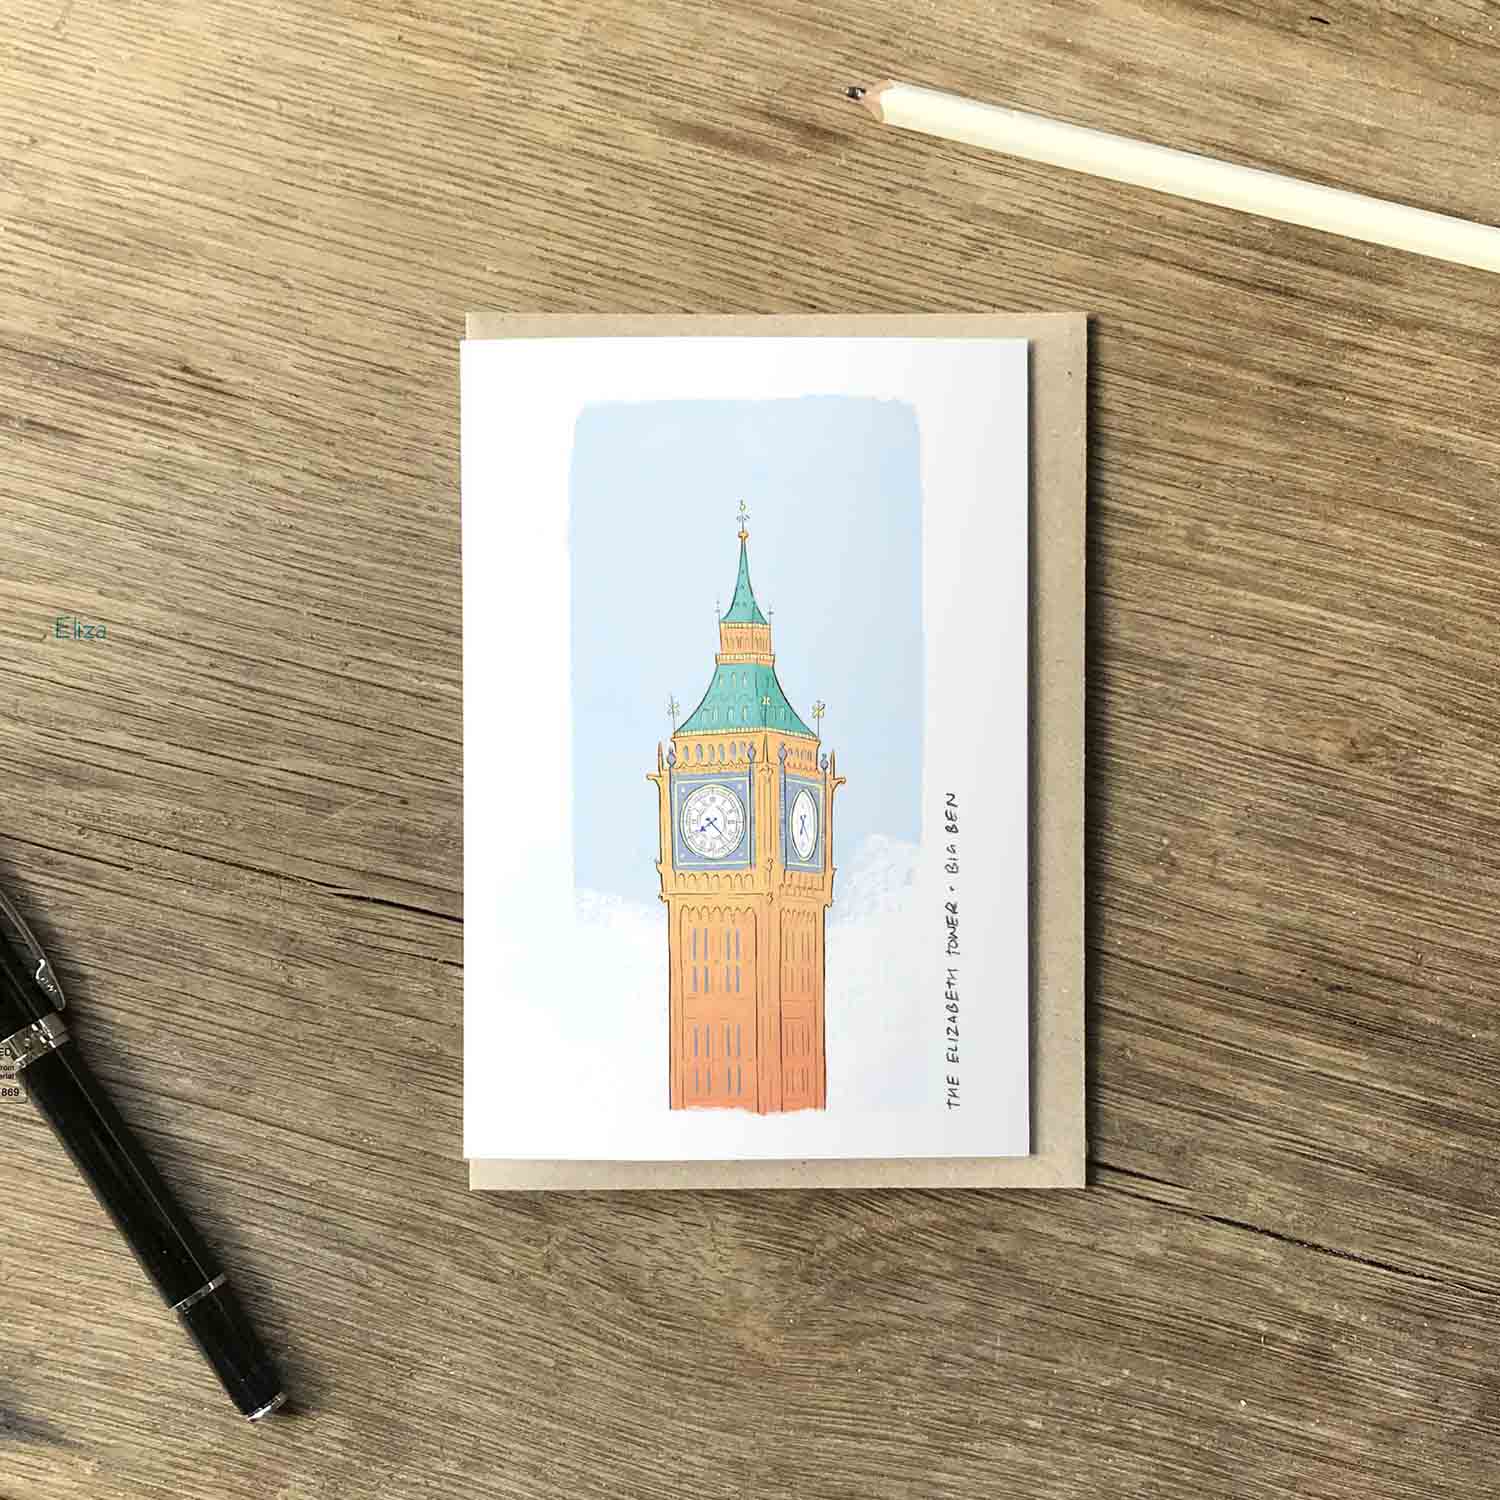 Londons big ben beautifully illustrated on a greeting card from mike green illustration.